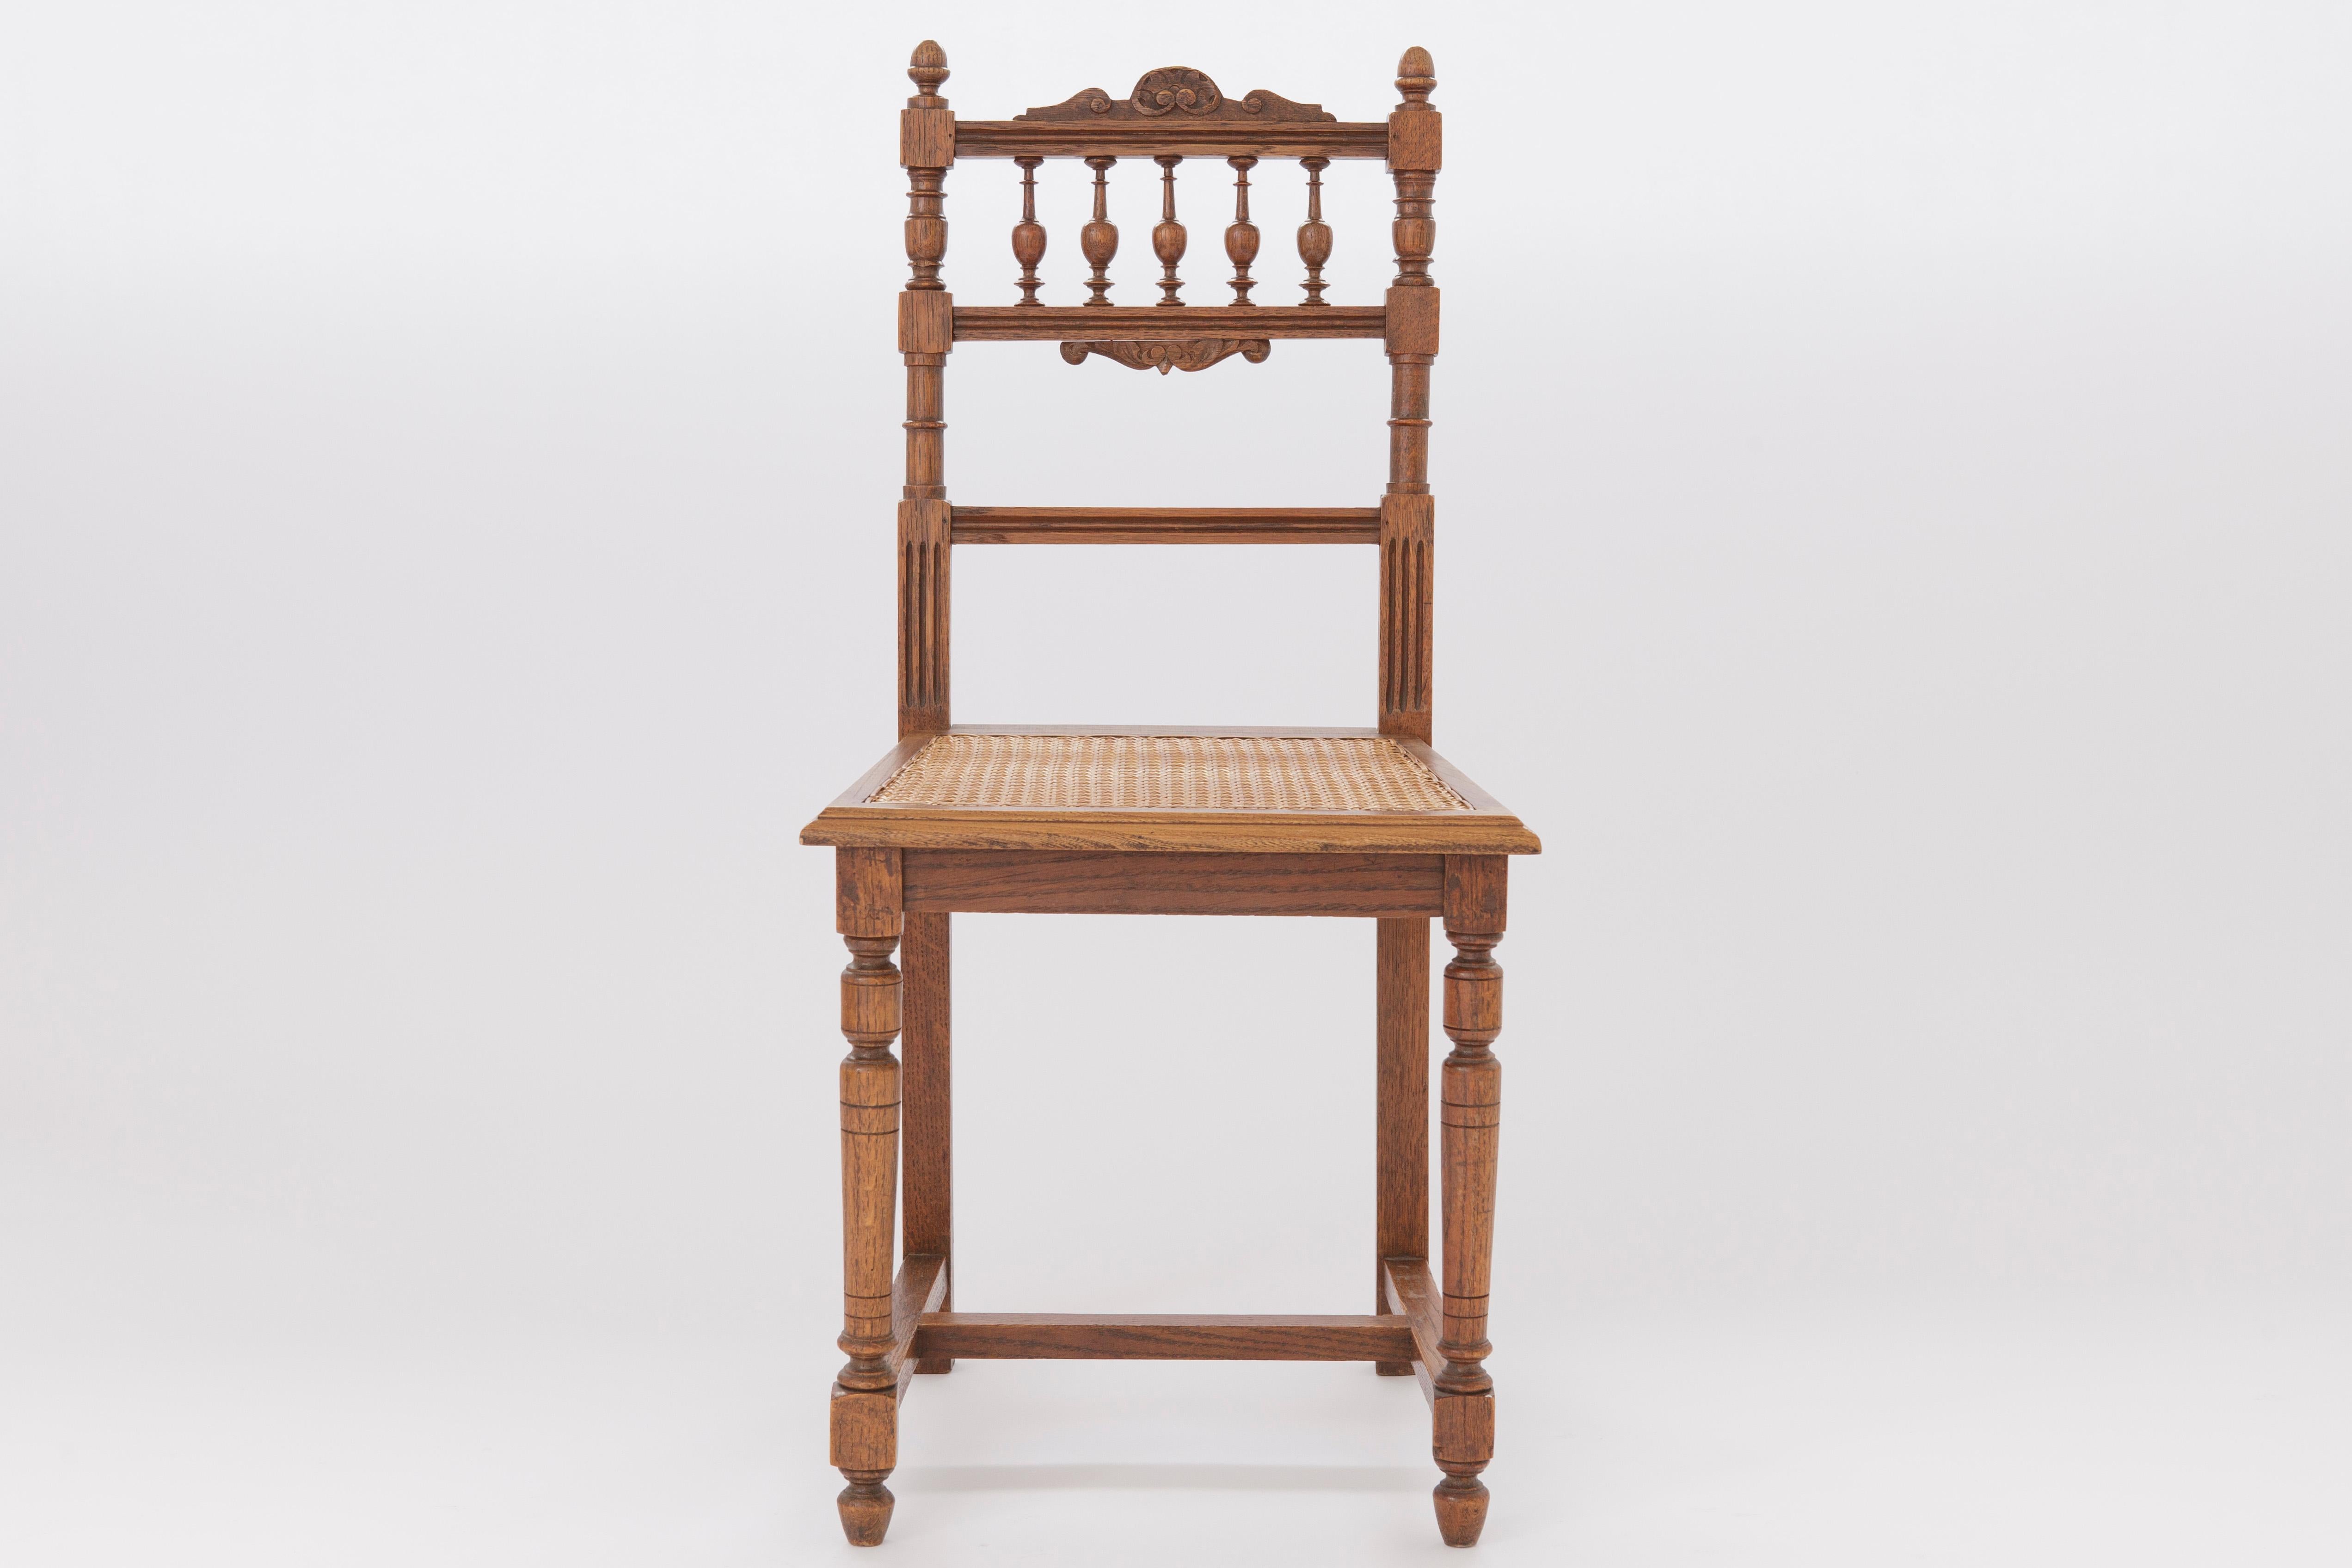 Antique desk or dining chair. 
Production period: approx. First half of the 20th century
Origin: Belgium 

Very good and stable condition of the wood frame.  
The weaving seems to be still original and not very strong to use the chair regular. 
The